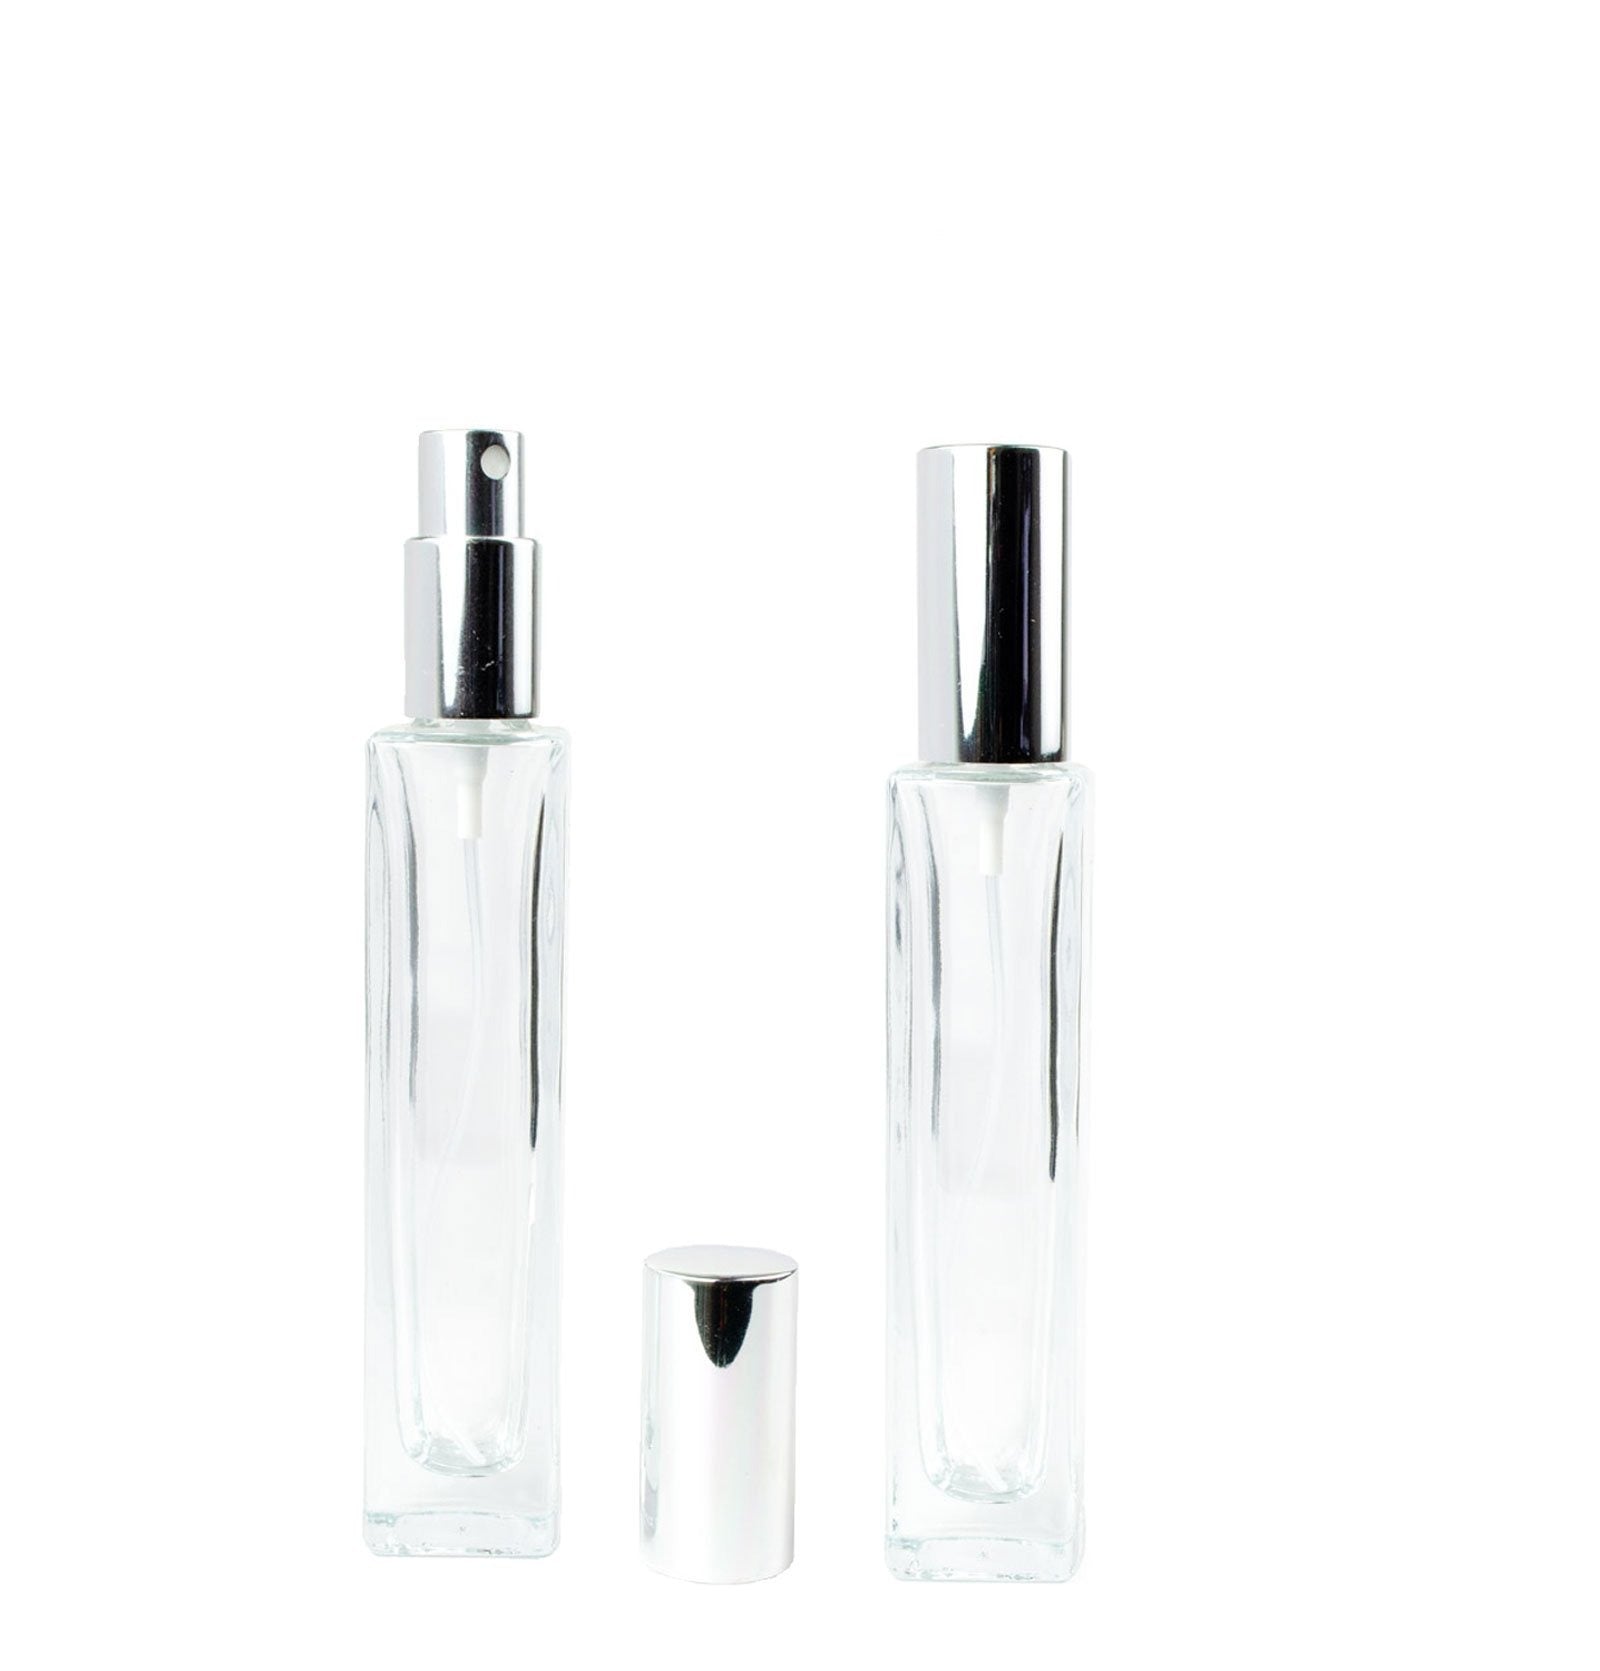 8 Pcs 30ml Perfume Bottles Empty Atomizer,Perfume Spray Bottle,Fine Mist  Spray Bottles Composed of a Glass Bottle, a Clear Acrylic Cap, And a Silver